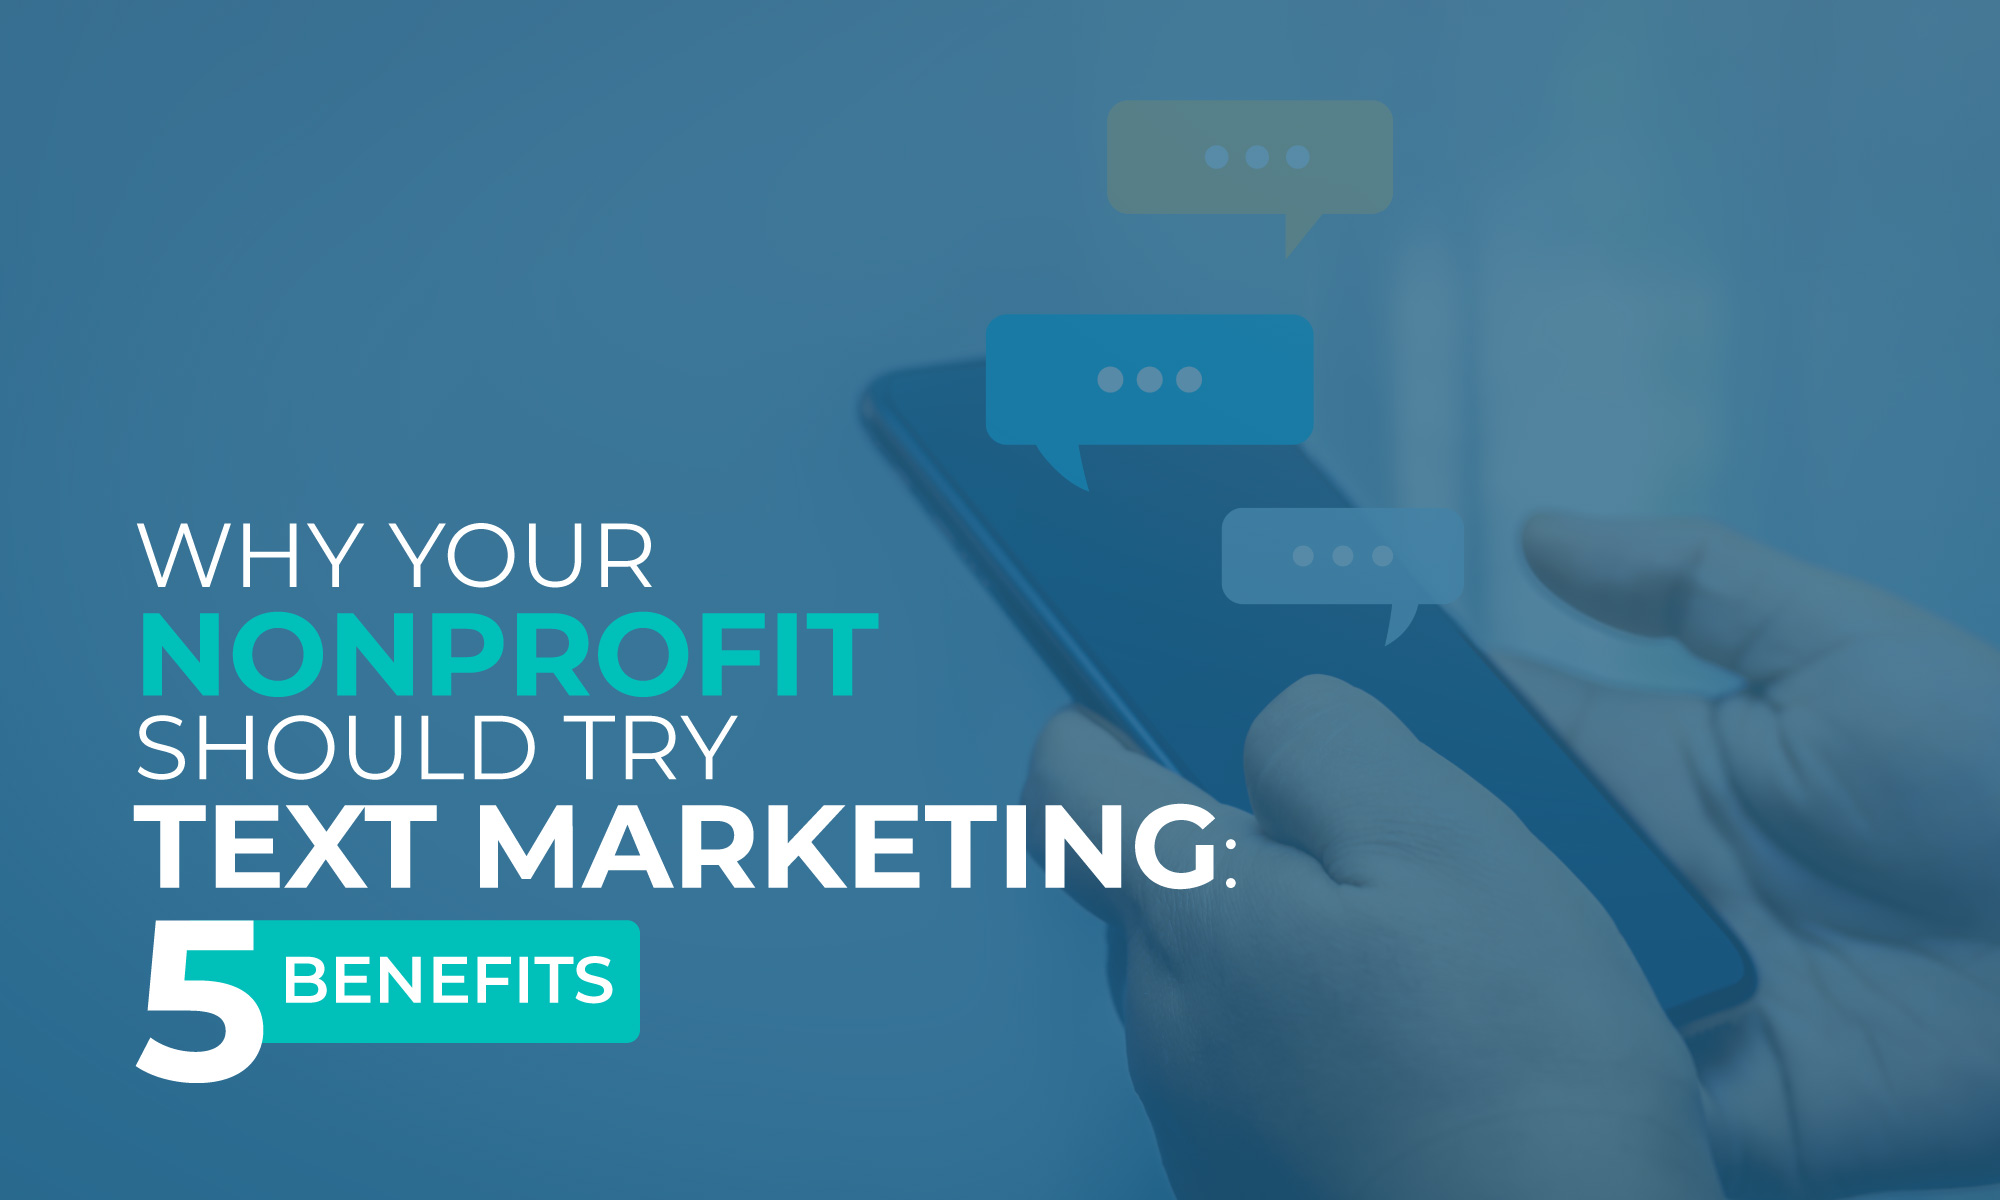 Learn more about how your nonprofit can use text marketing to drive impact.